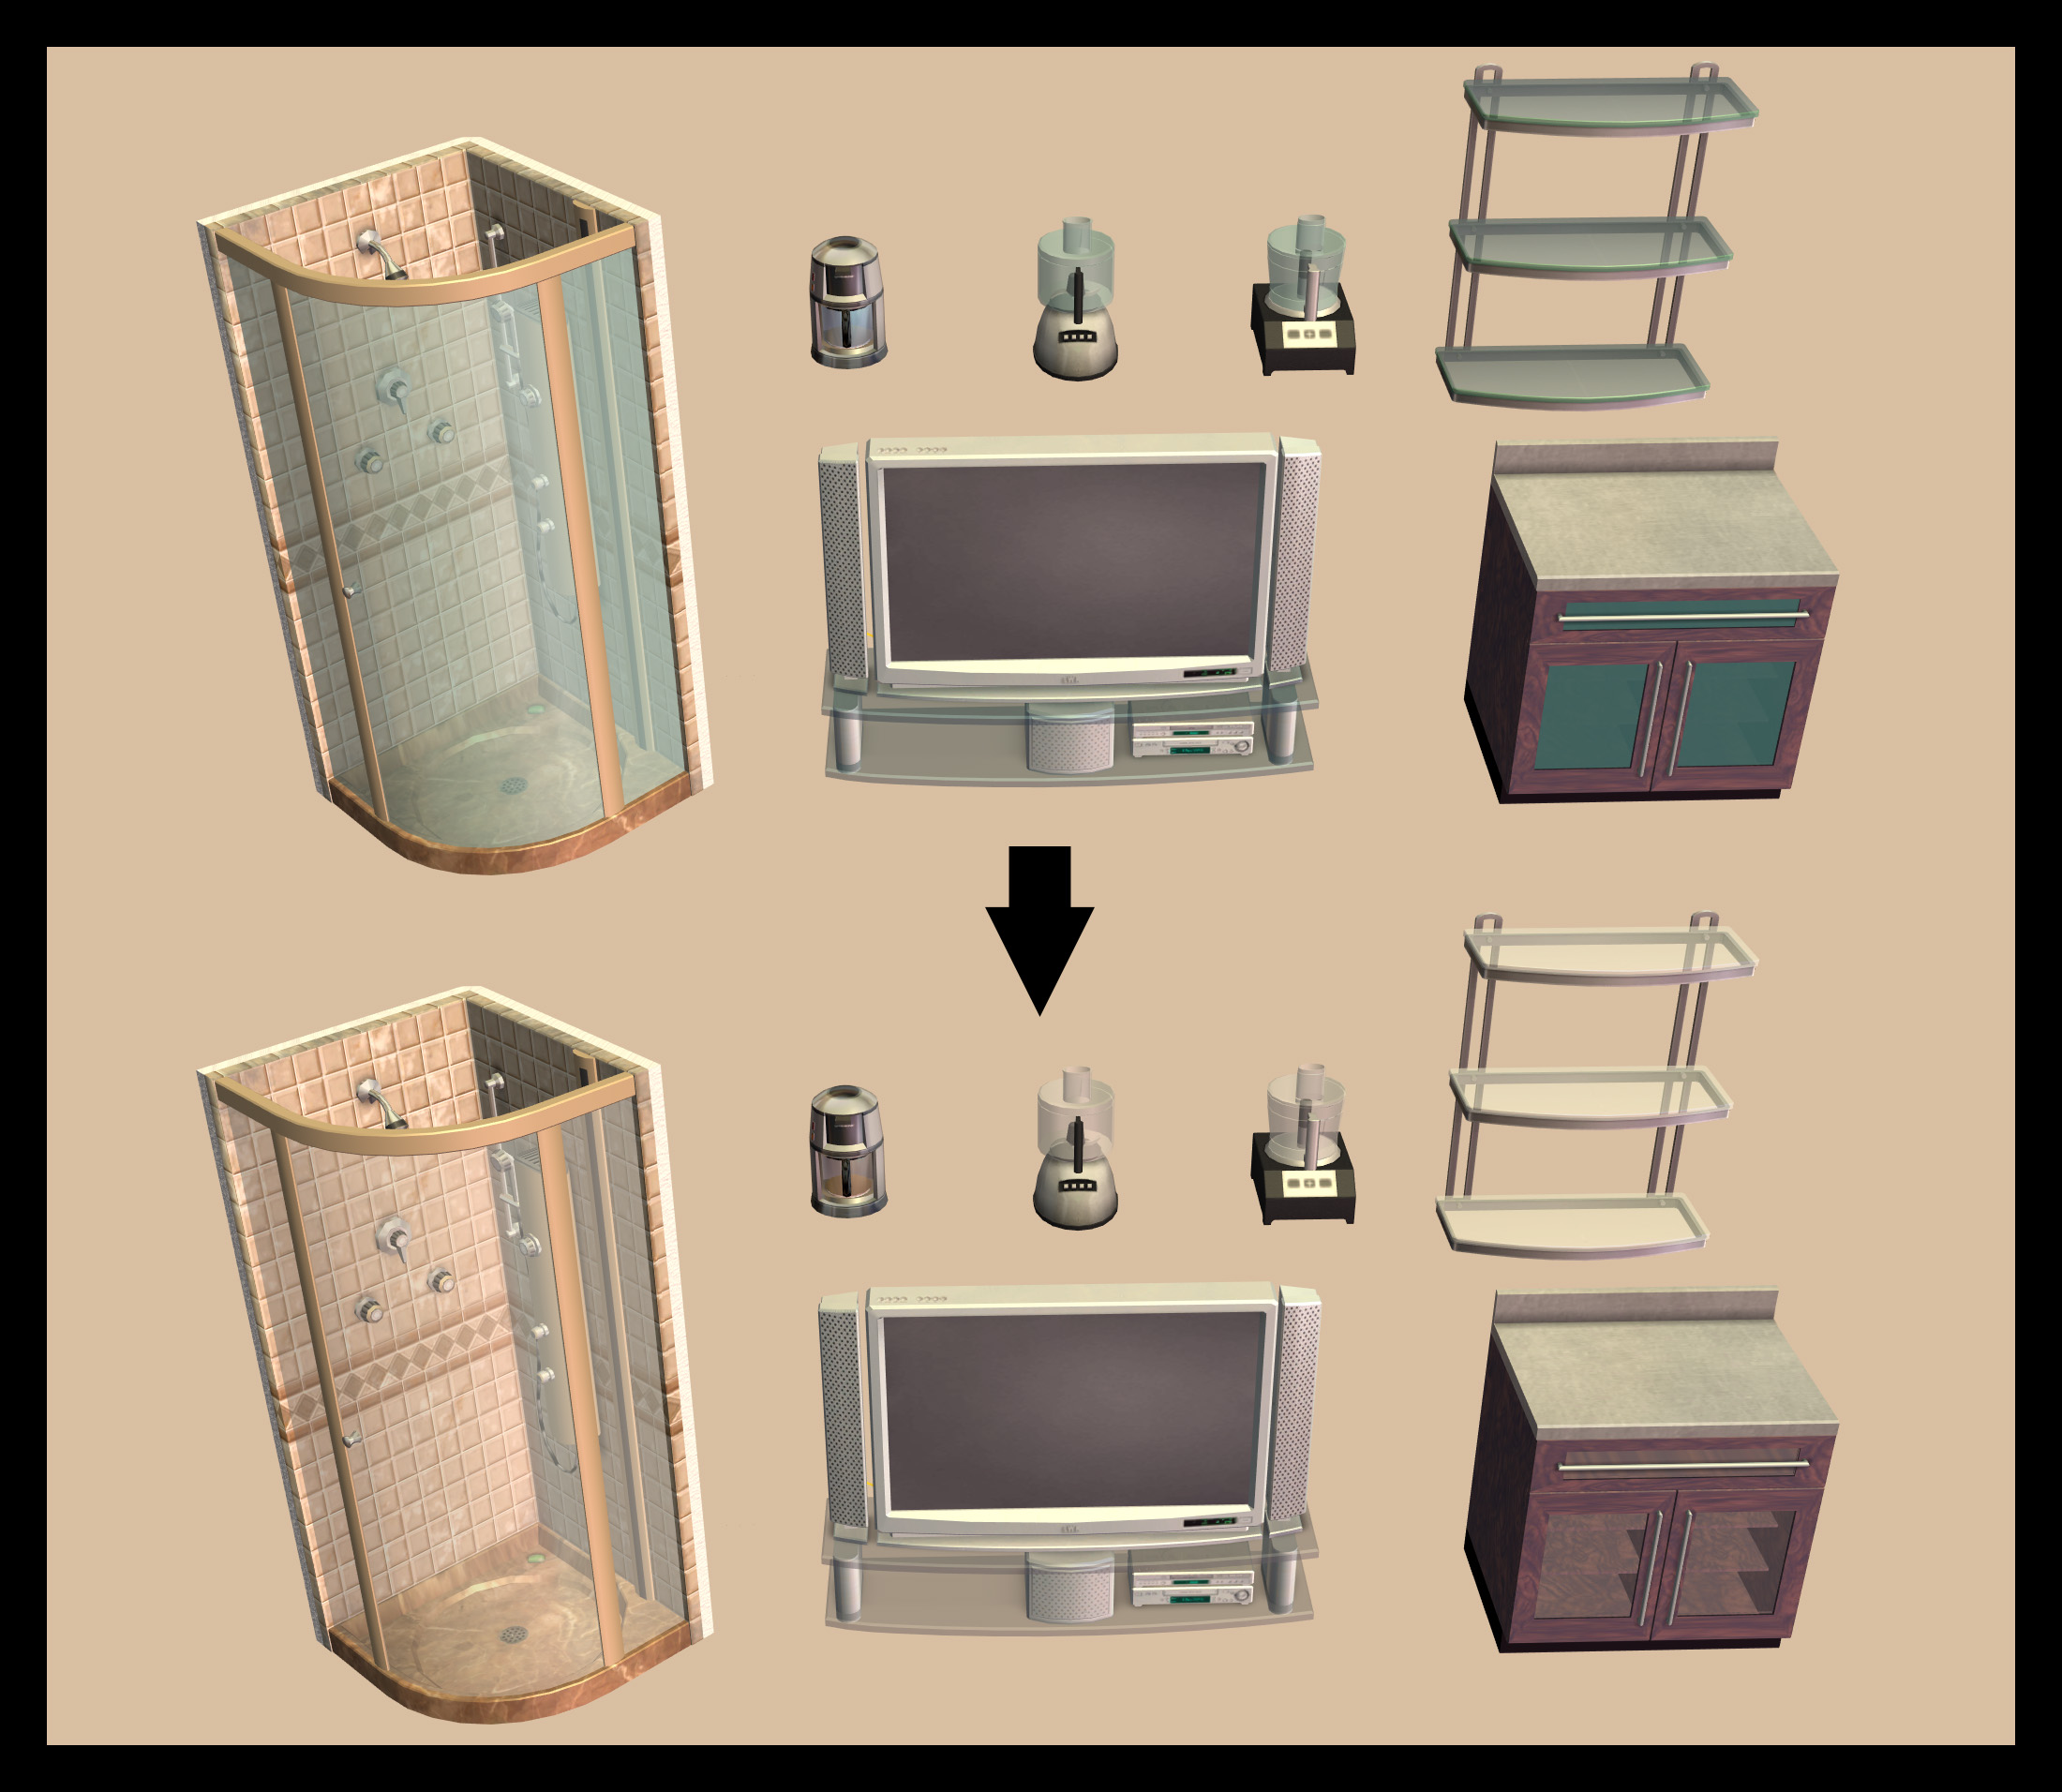 Mod The Sims - 12 Coffee Mug Default Replacements with Recolor